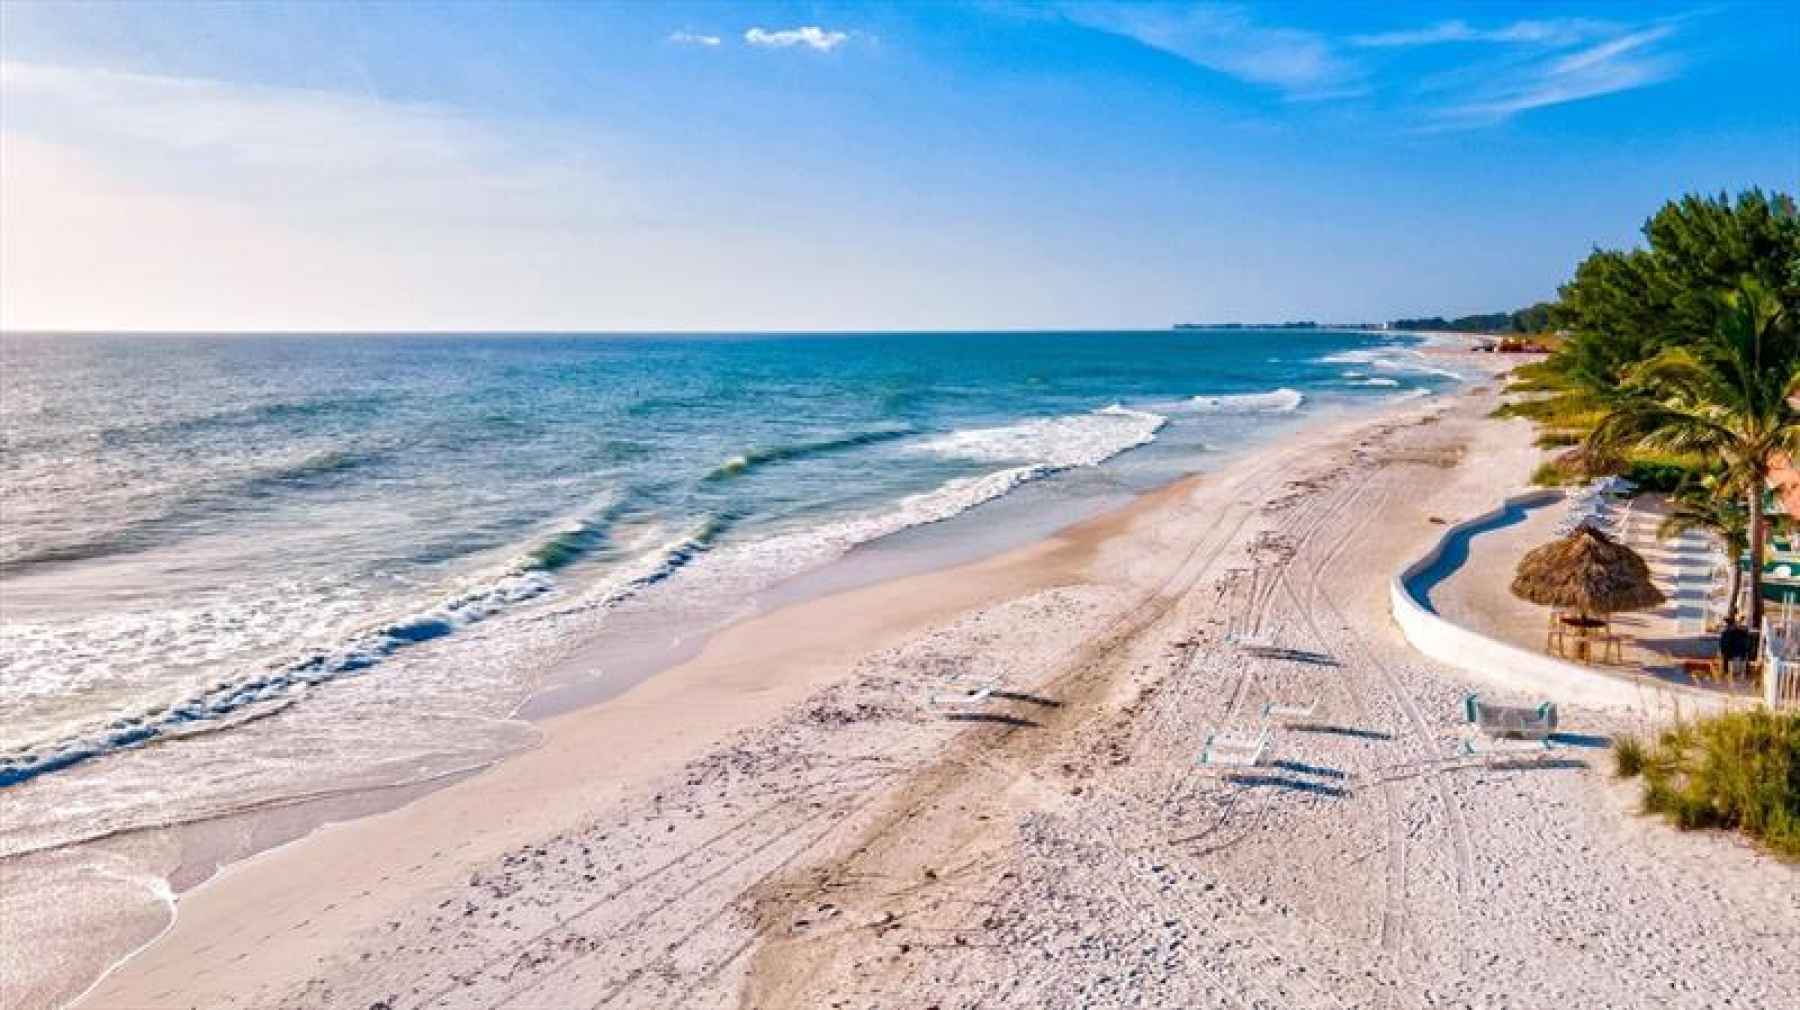 Local attractions: Gulf beaches